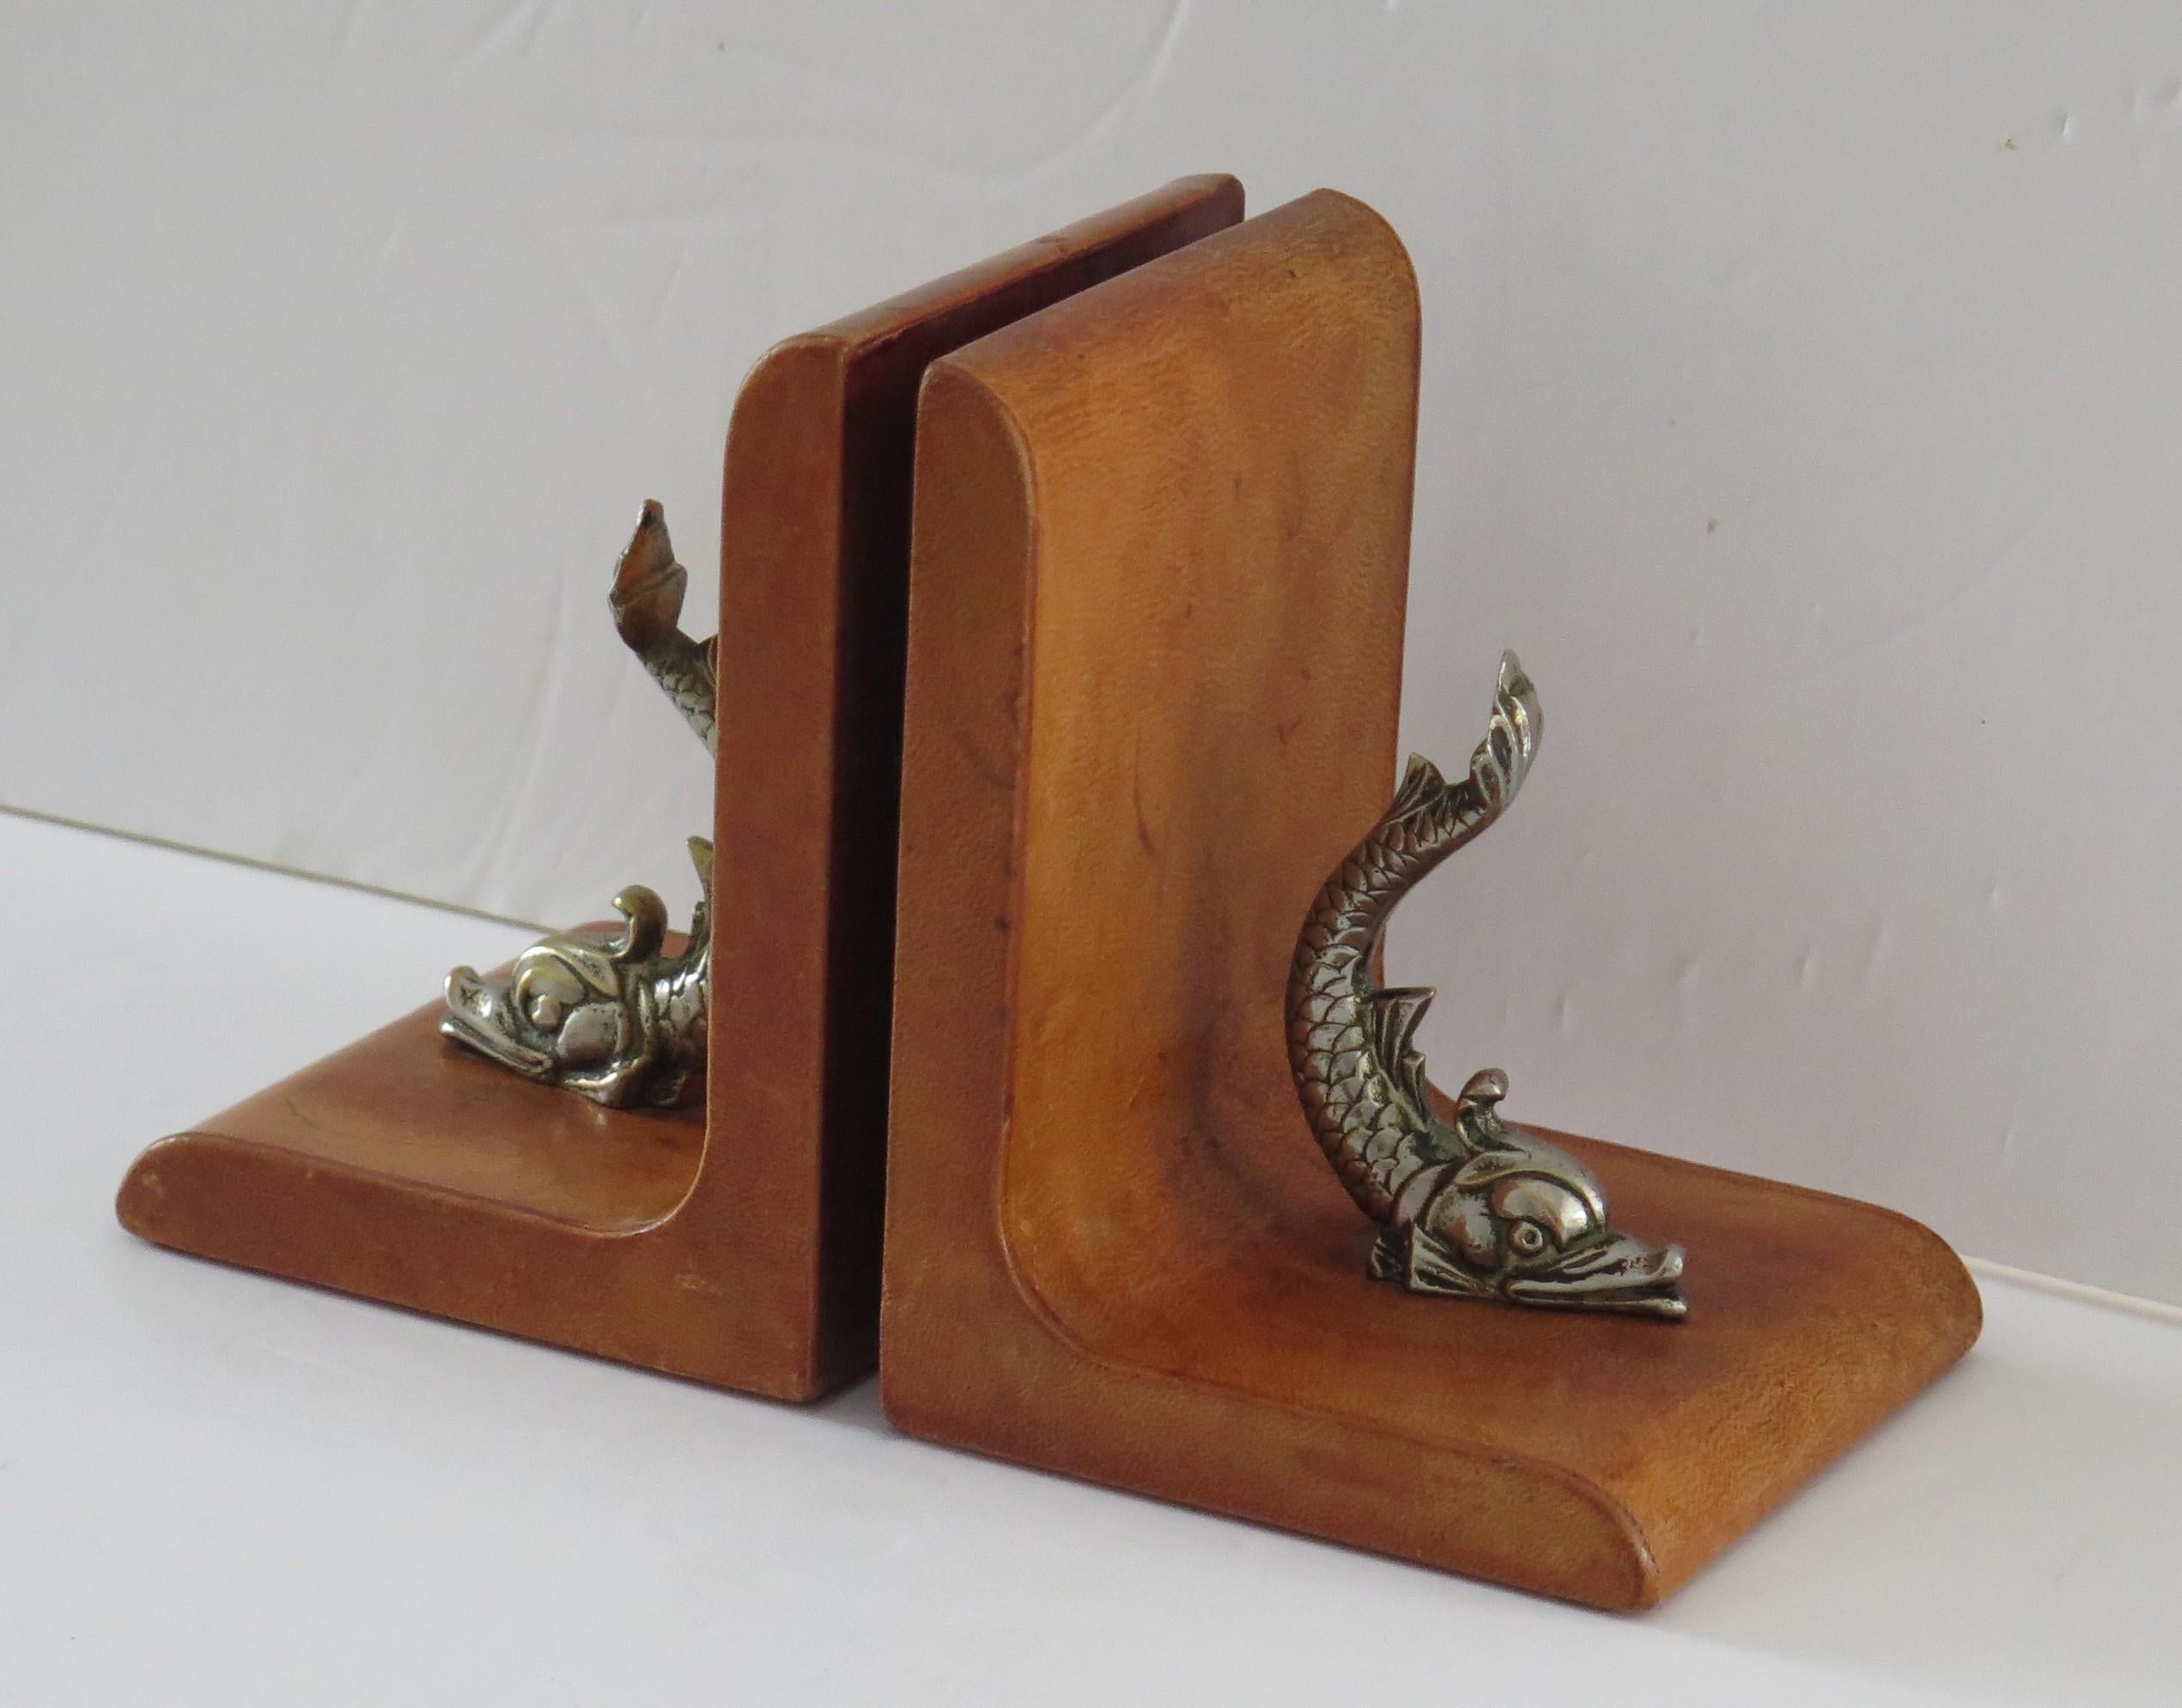 dragon bookends